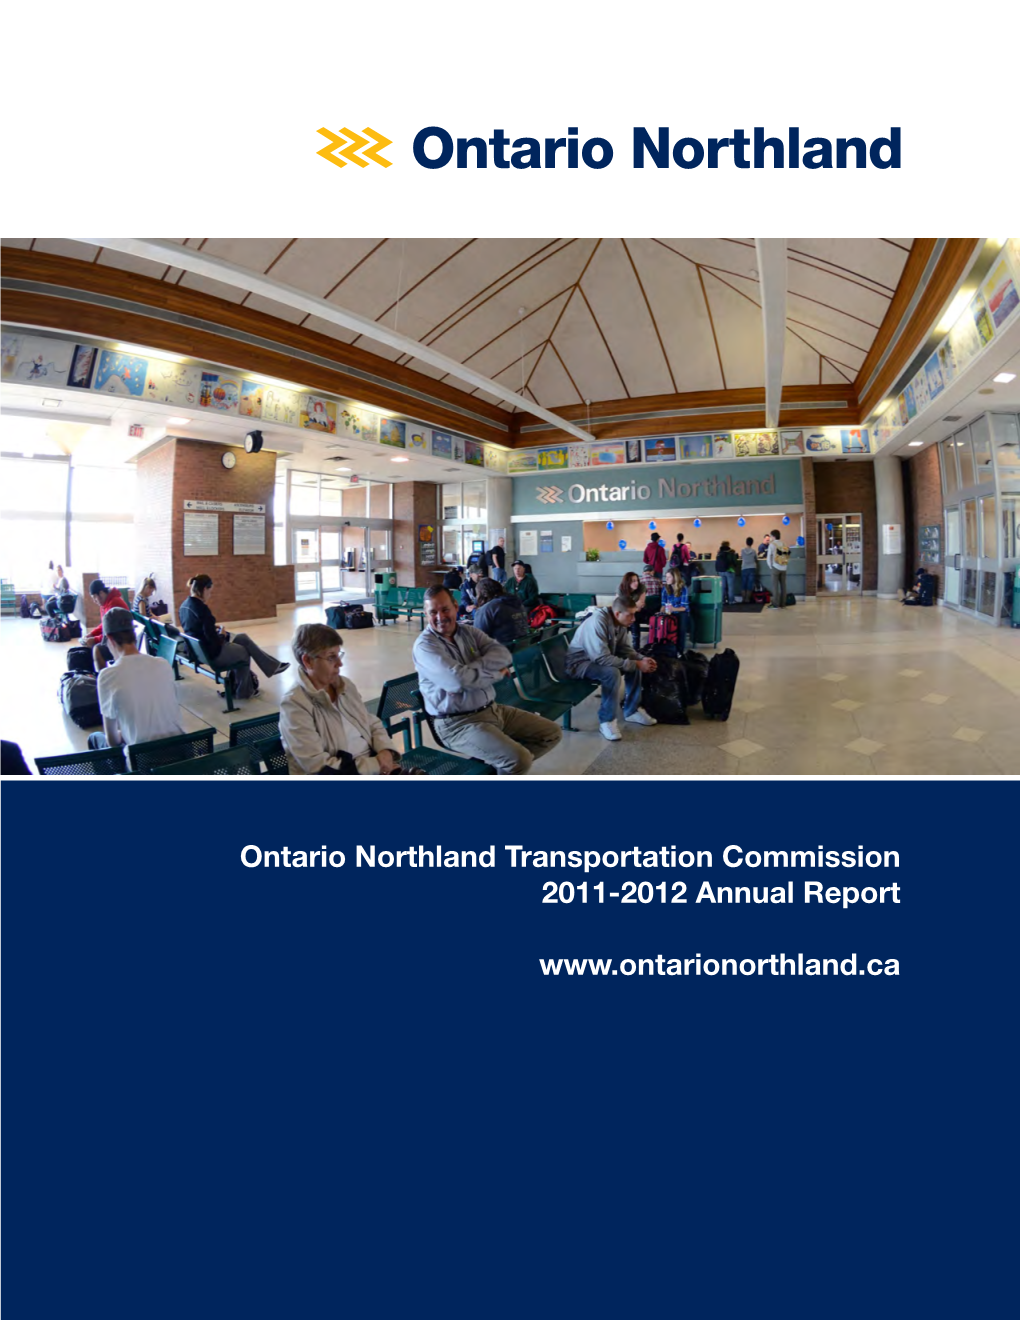 Ontario Northland Transportation Commission 2011-2012 Annual Report